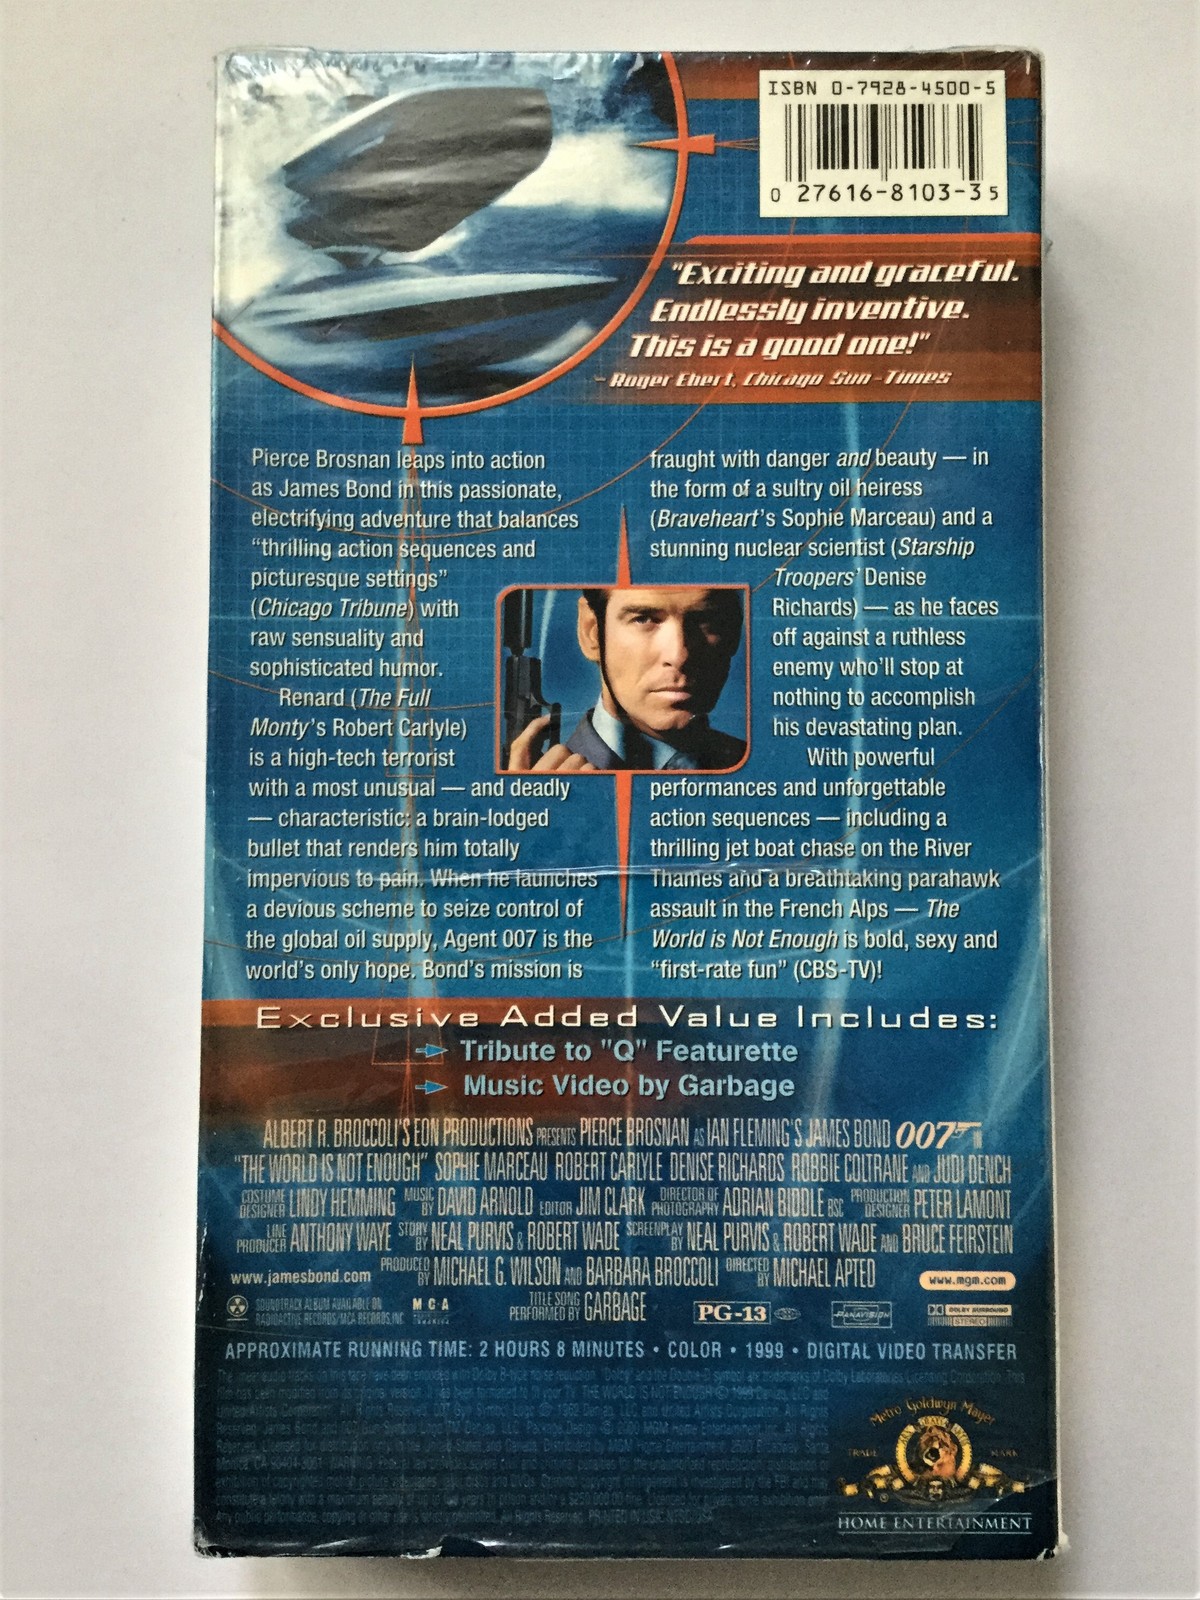 007 THE WORLD IS NOT ENOUGH with Pierce Brosnan VHS 1999 - VHS Tapes